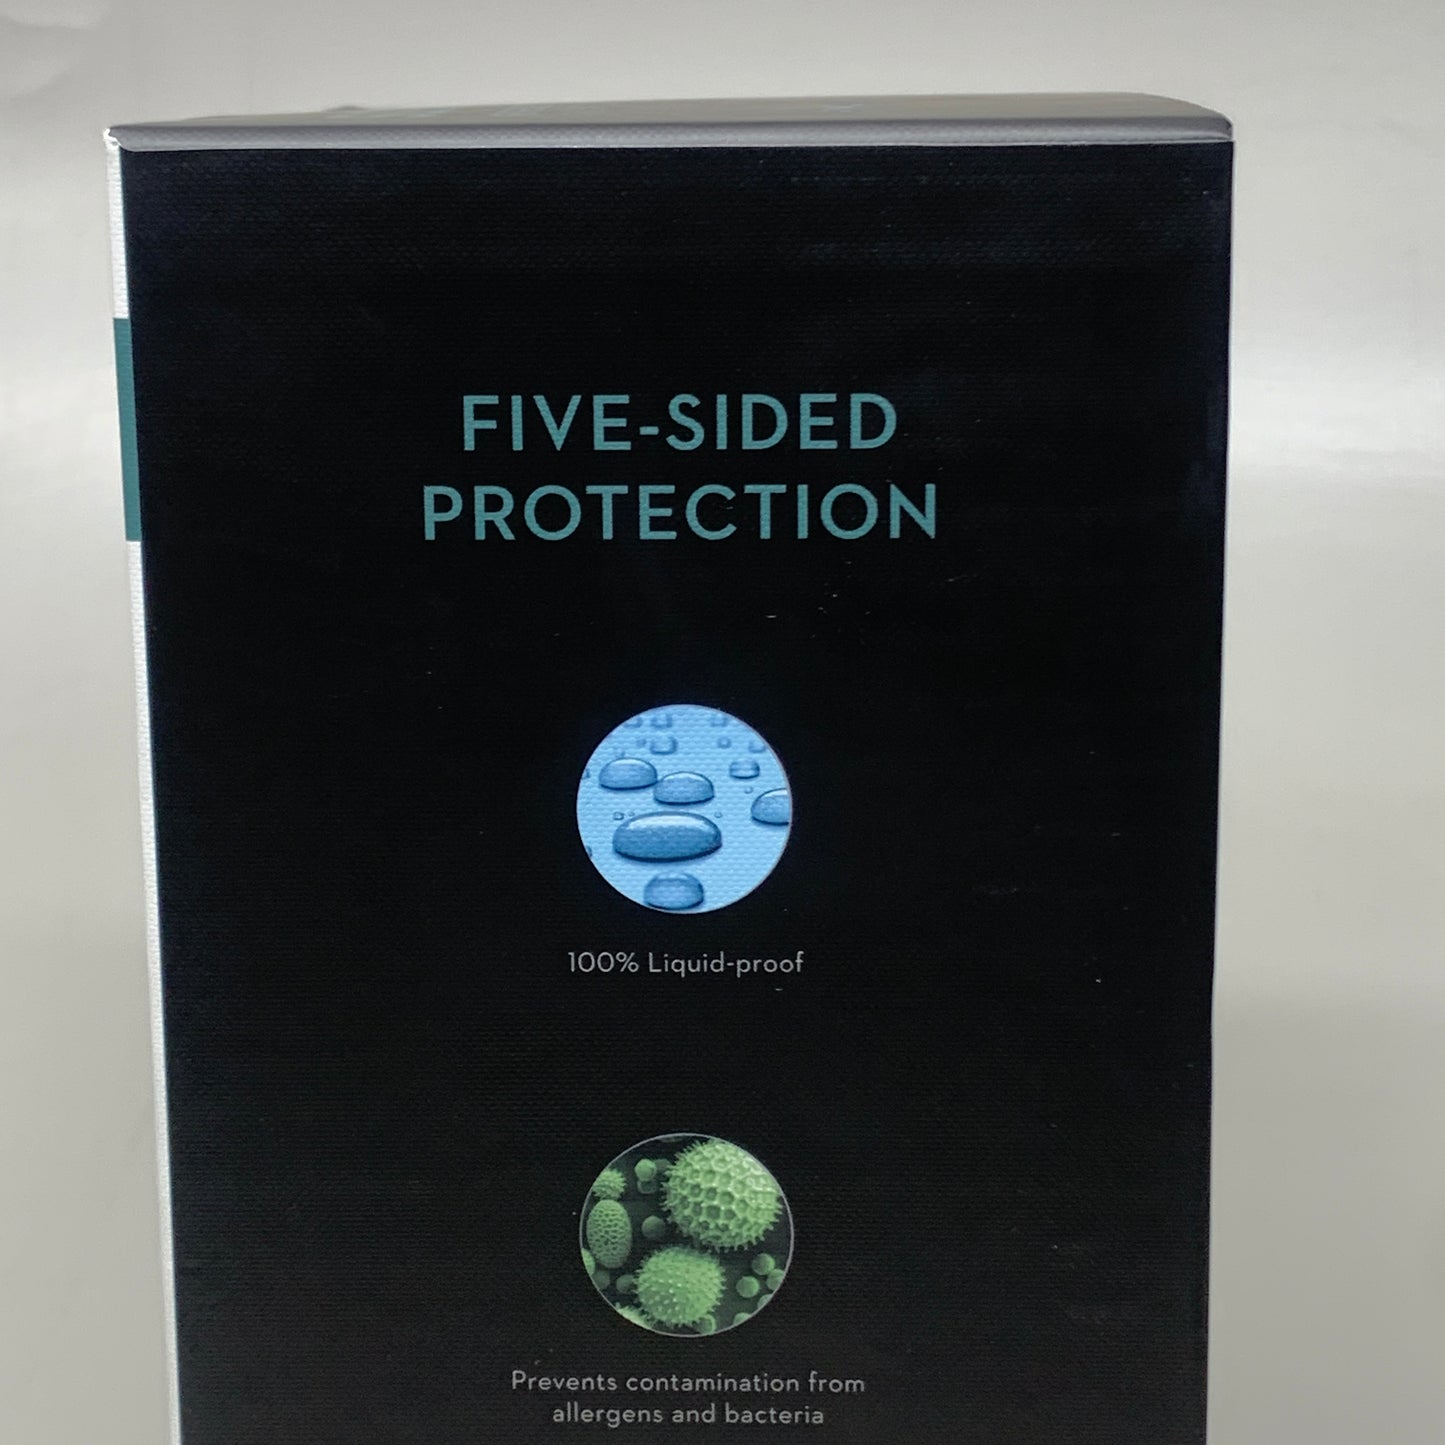 MALOUF Sleep-Tite Five 5ided Smooth Mattress Protector Sz King 100% Water-Proof